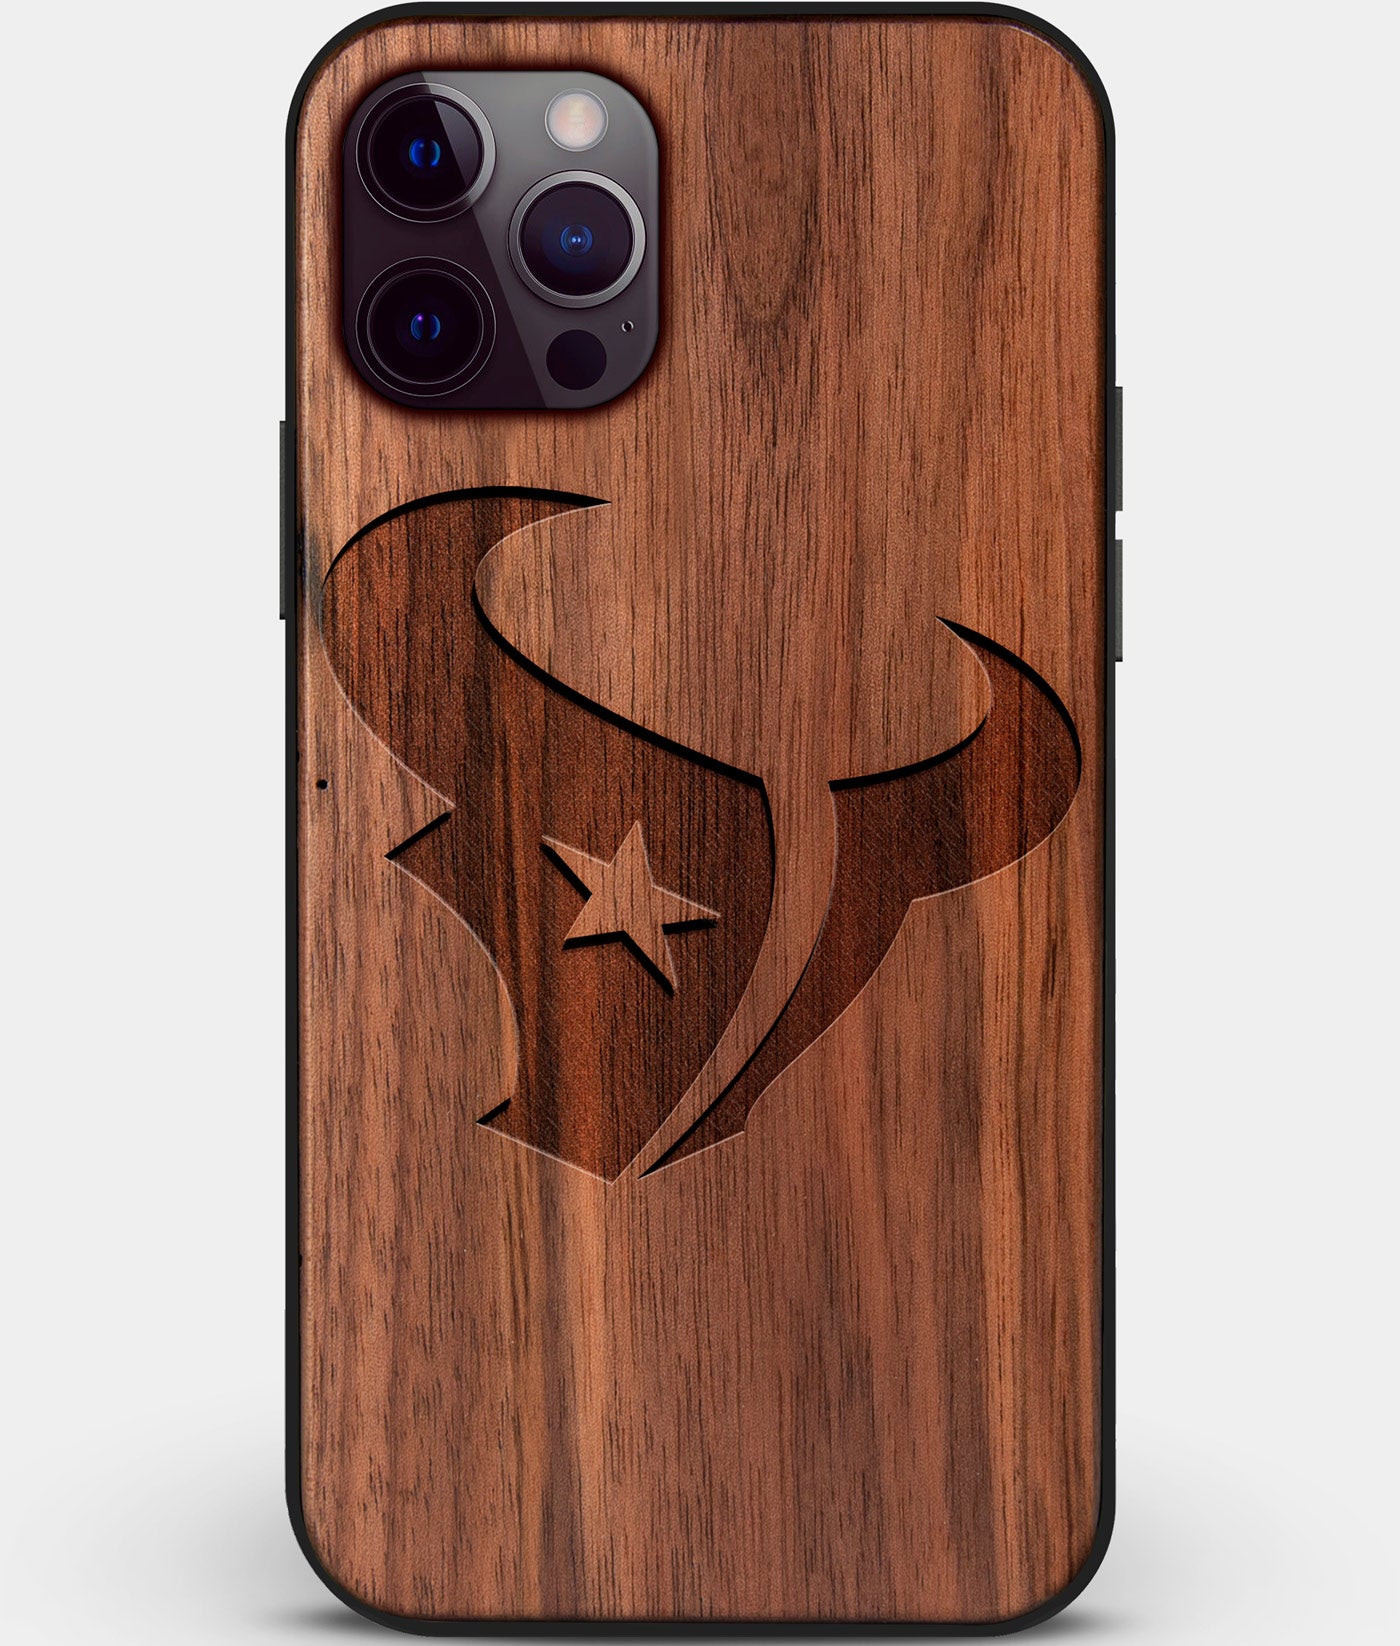 Custom Carved Wood Houston Texans iPhone 12 Pro Case | Personalized Walnut Wood Houston Texans Cover, Birthday Gift, Gifts For Him, Monogrammed Gift For Fan | by Engraved In Nature